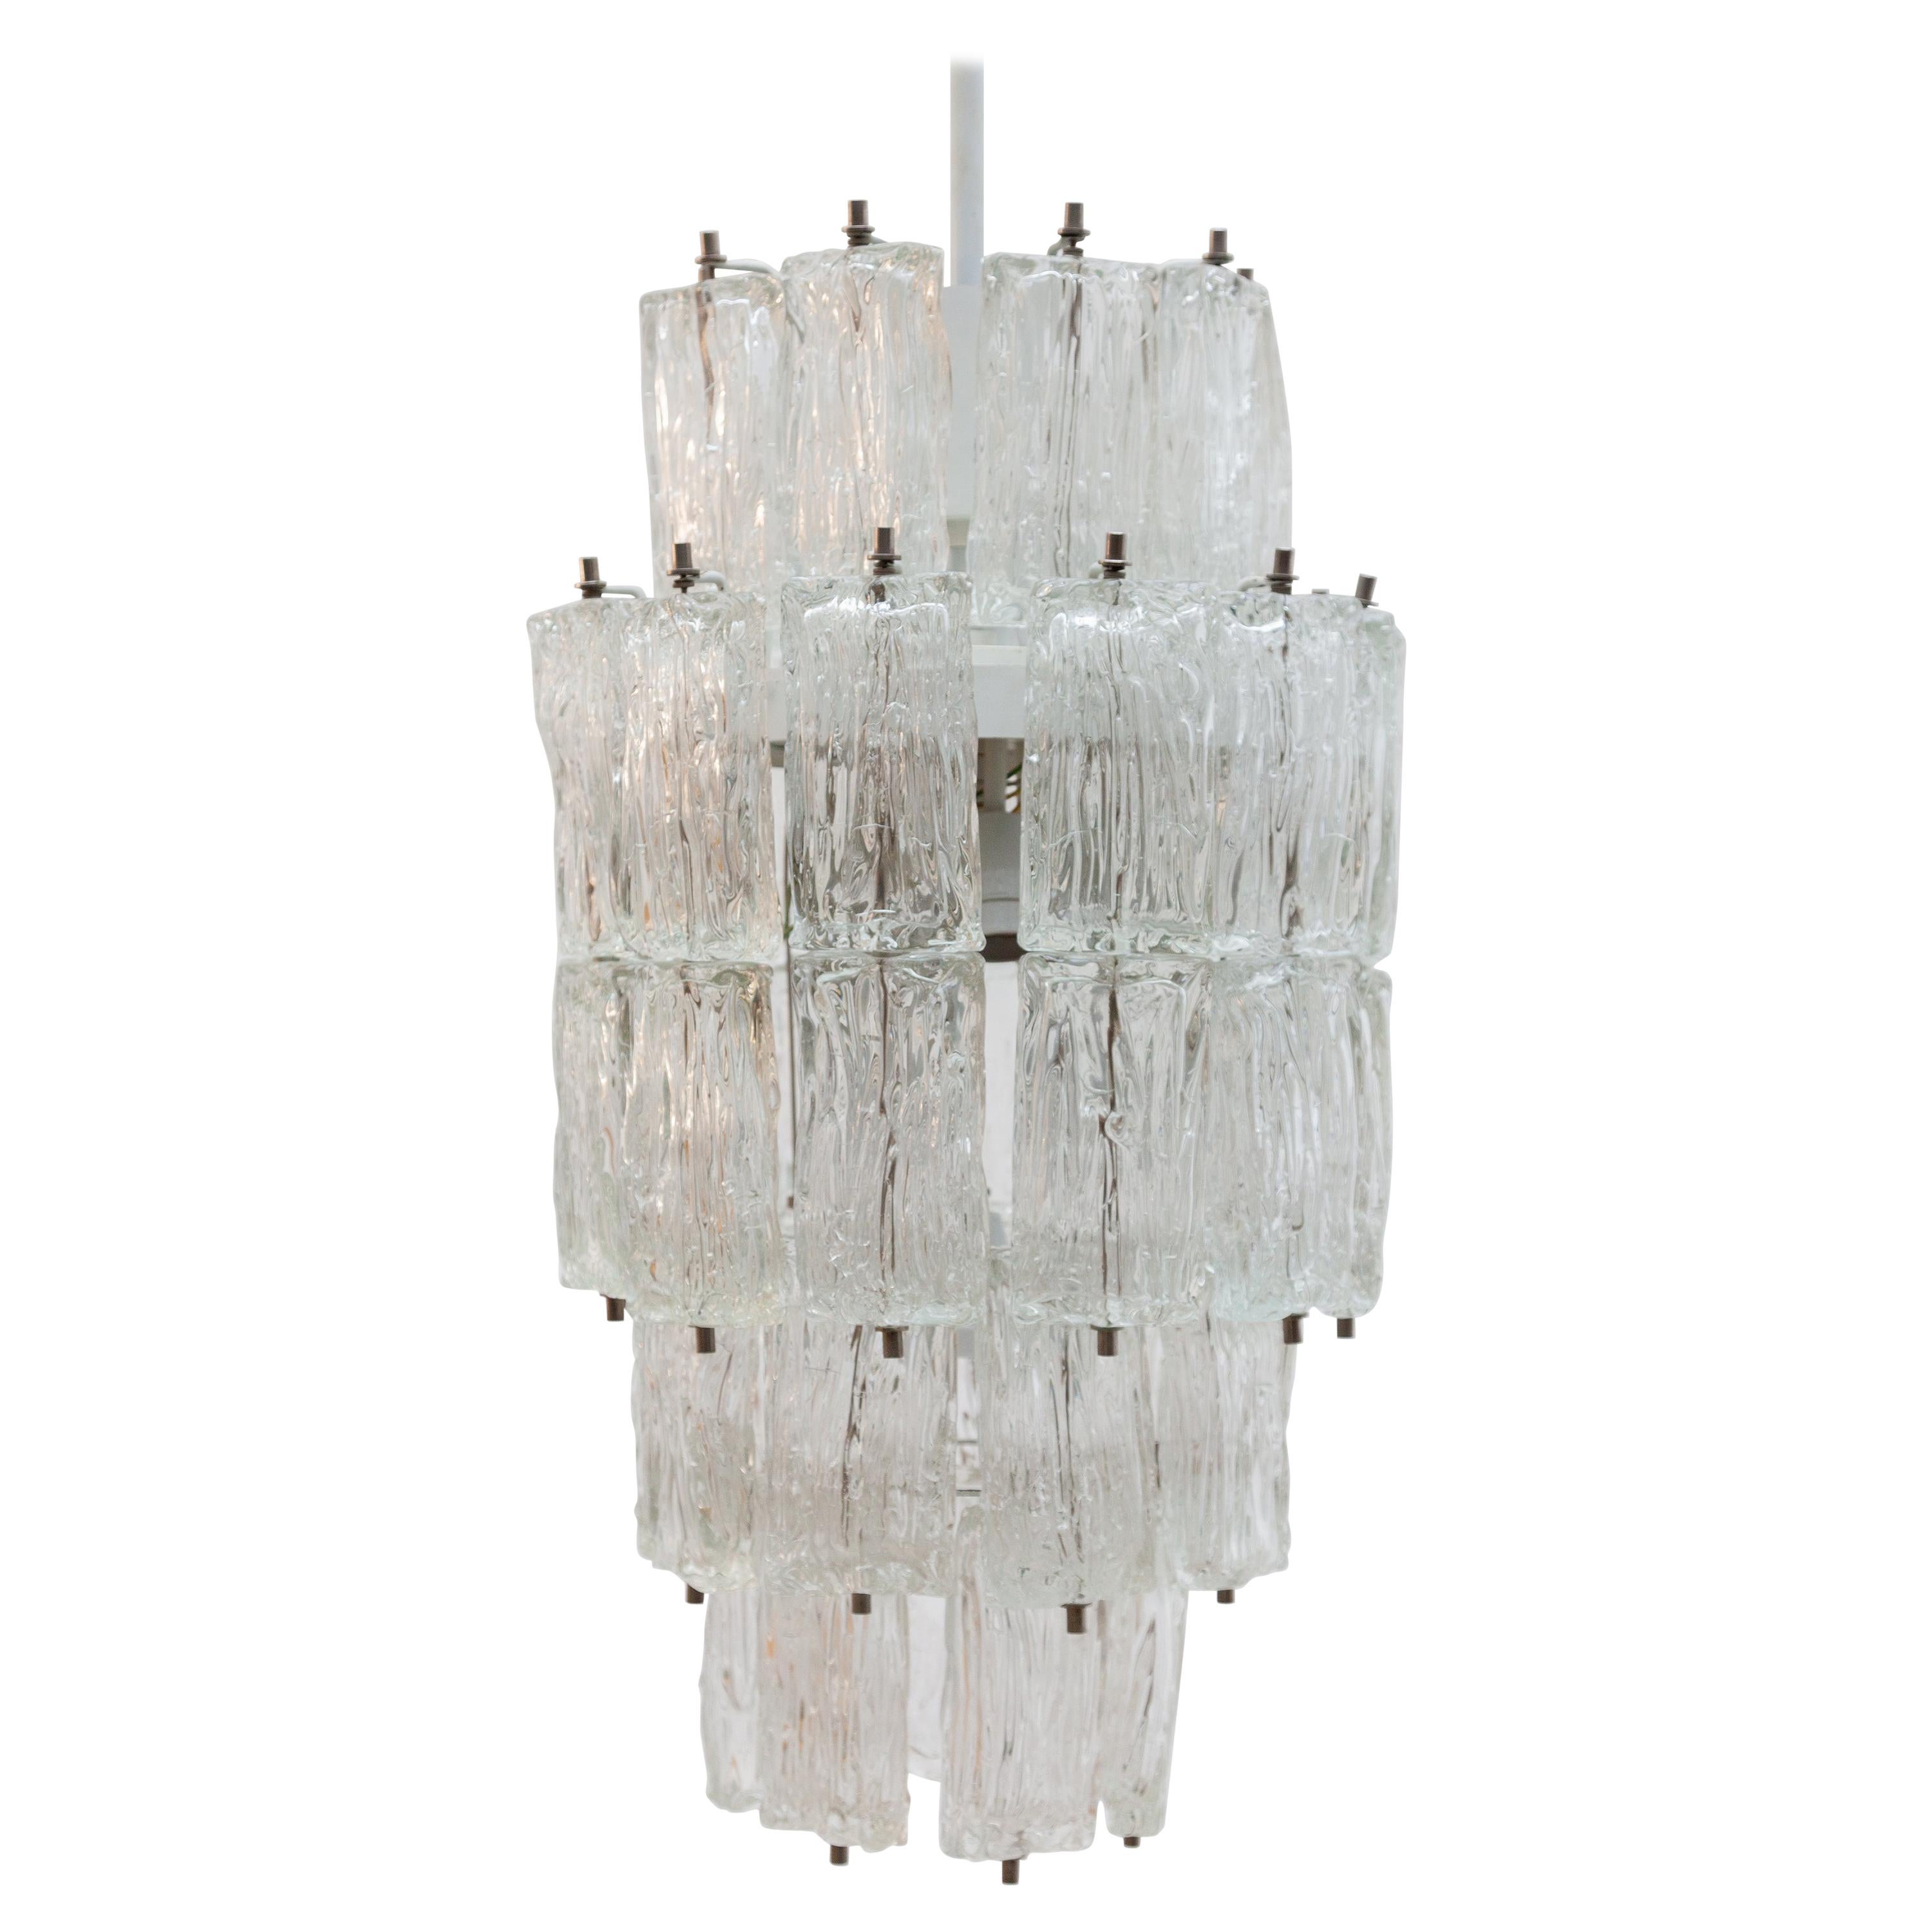 Venini Large Chandelier Iced Textured Clear Glass Five Tiers 1960s Murano, Italy